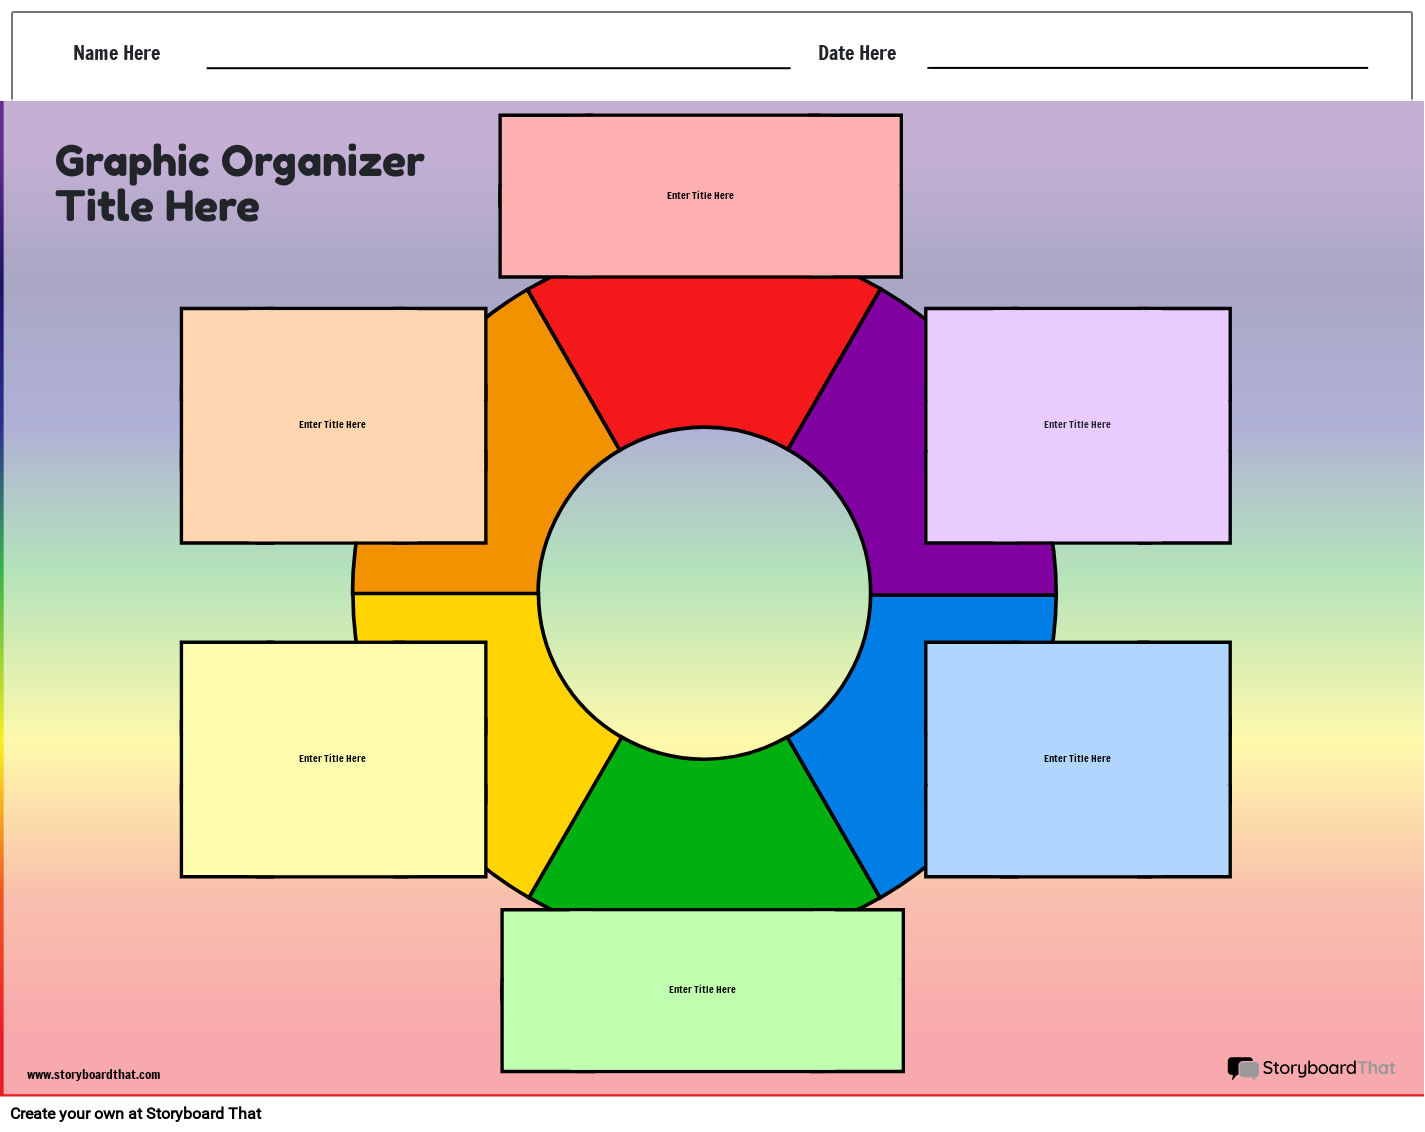 New Create Page General Graphic Organizer 1